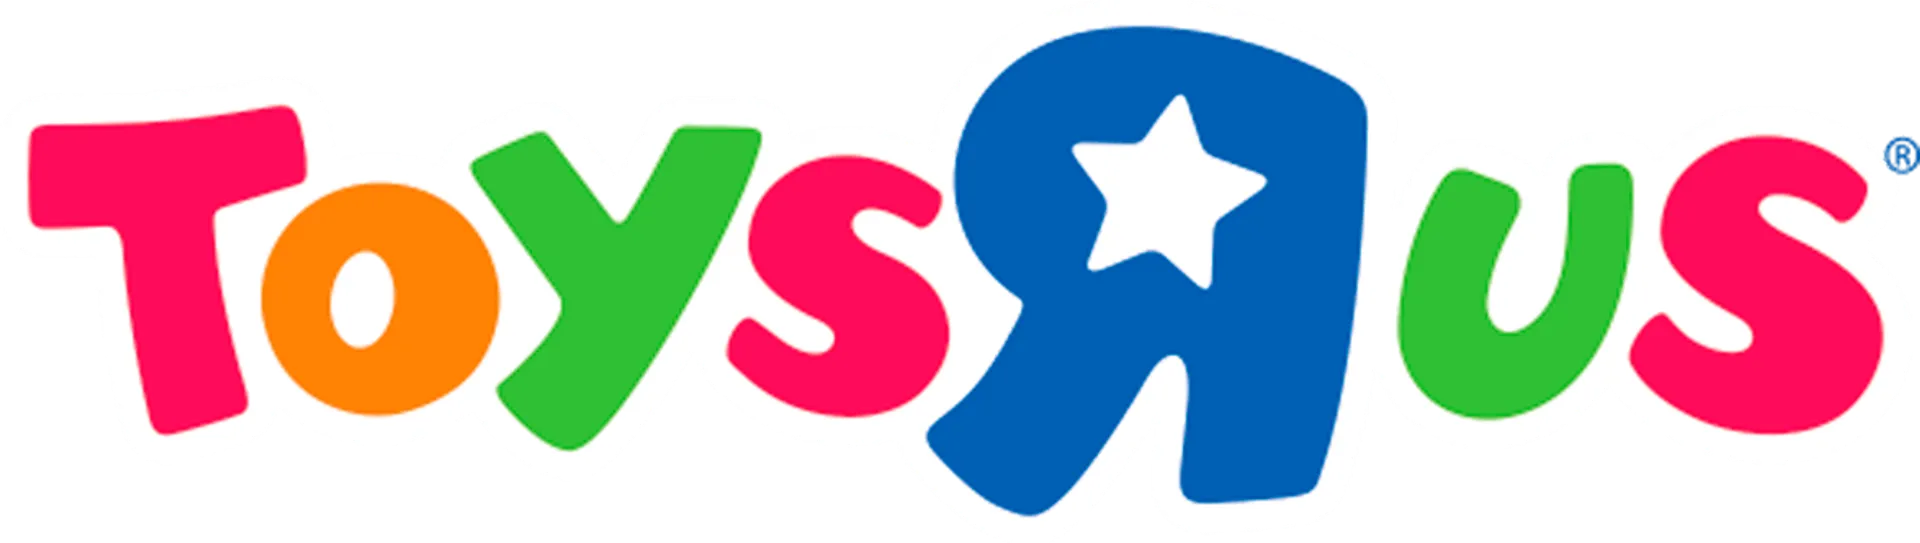 TOYS R US logo. Current catalogue